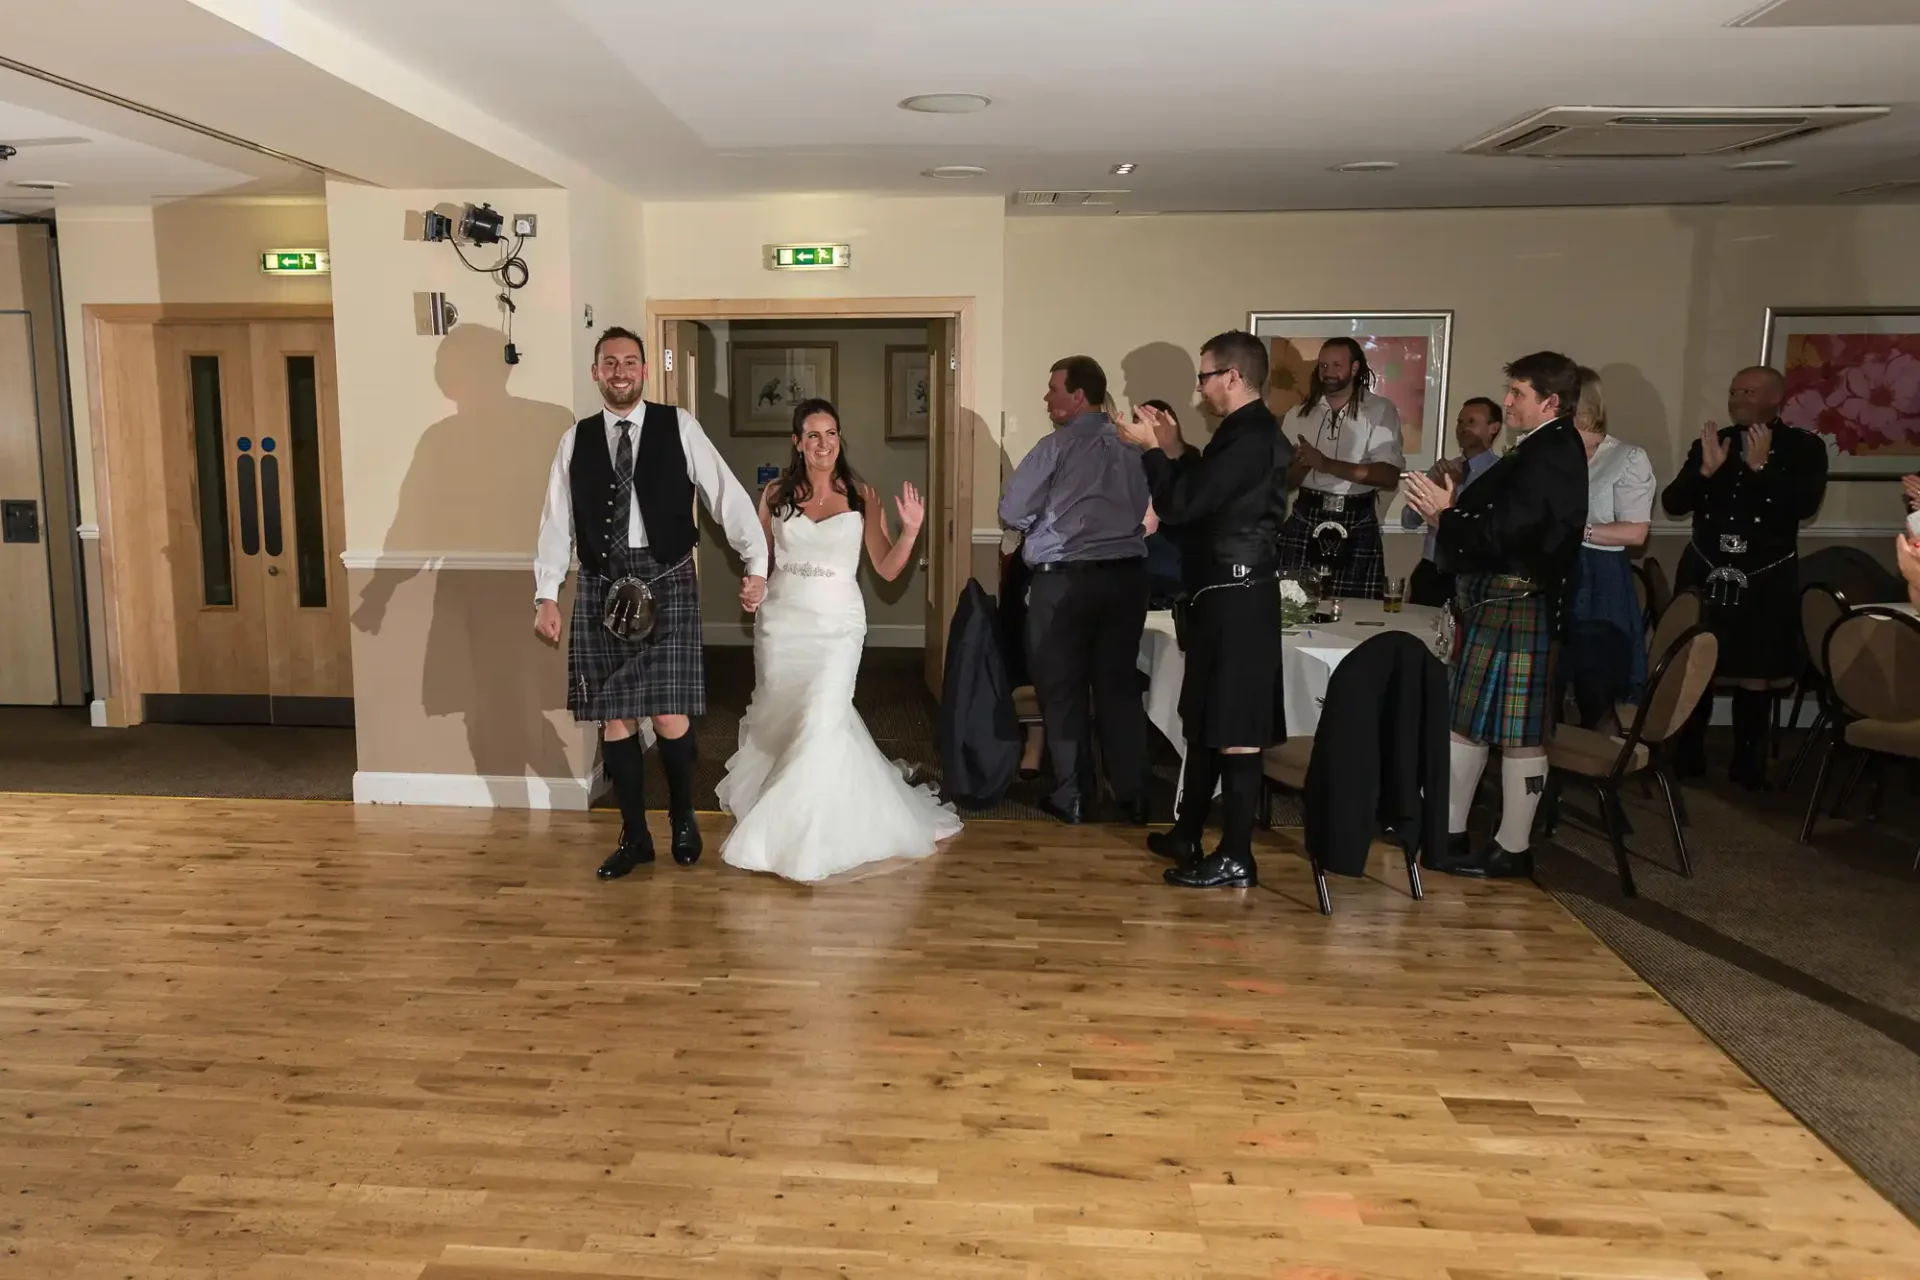 A bride in a white dress and a groom in a kilt joyfully walk through a room with applauding guests, some in traditional scottish attire.